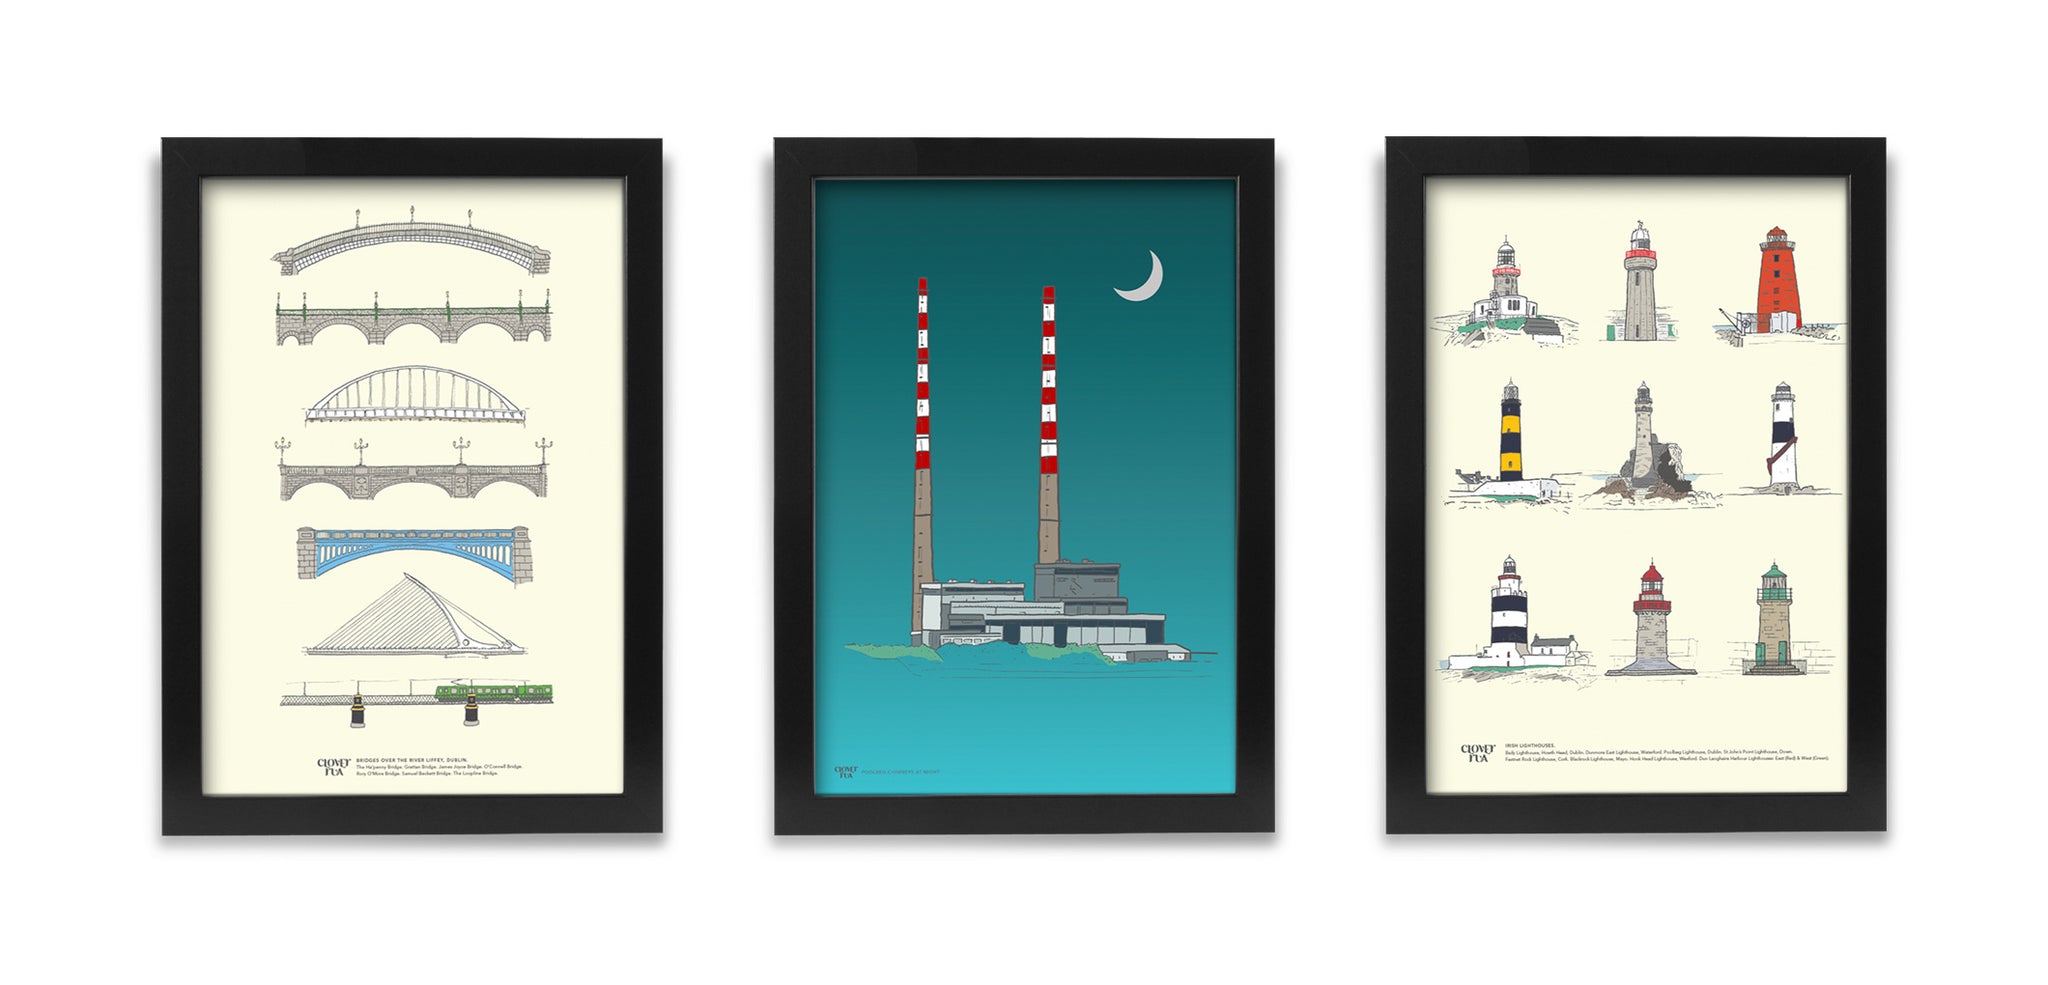 Amazing Value, Special Offer! Any THREE Prints for €29.95!